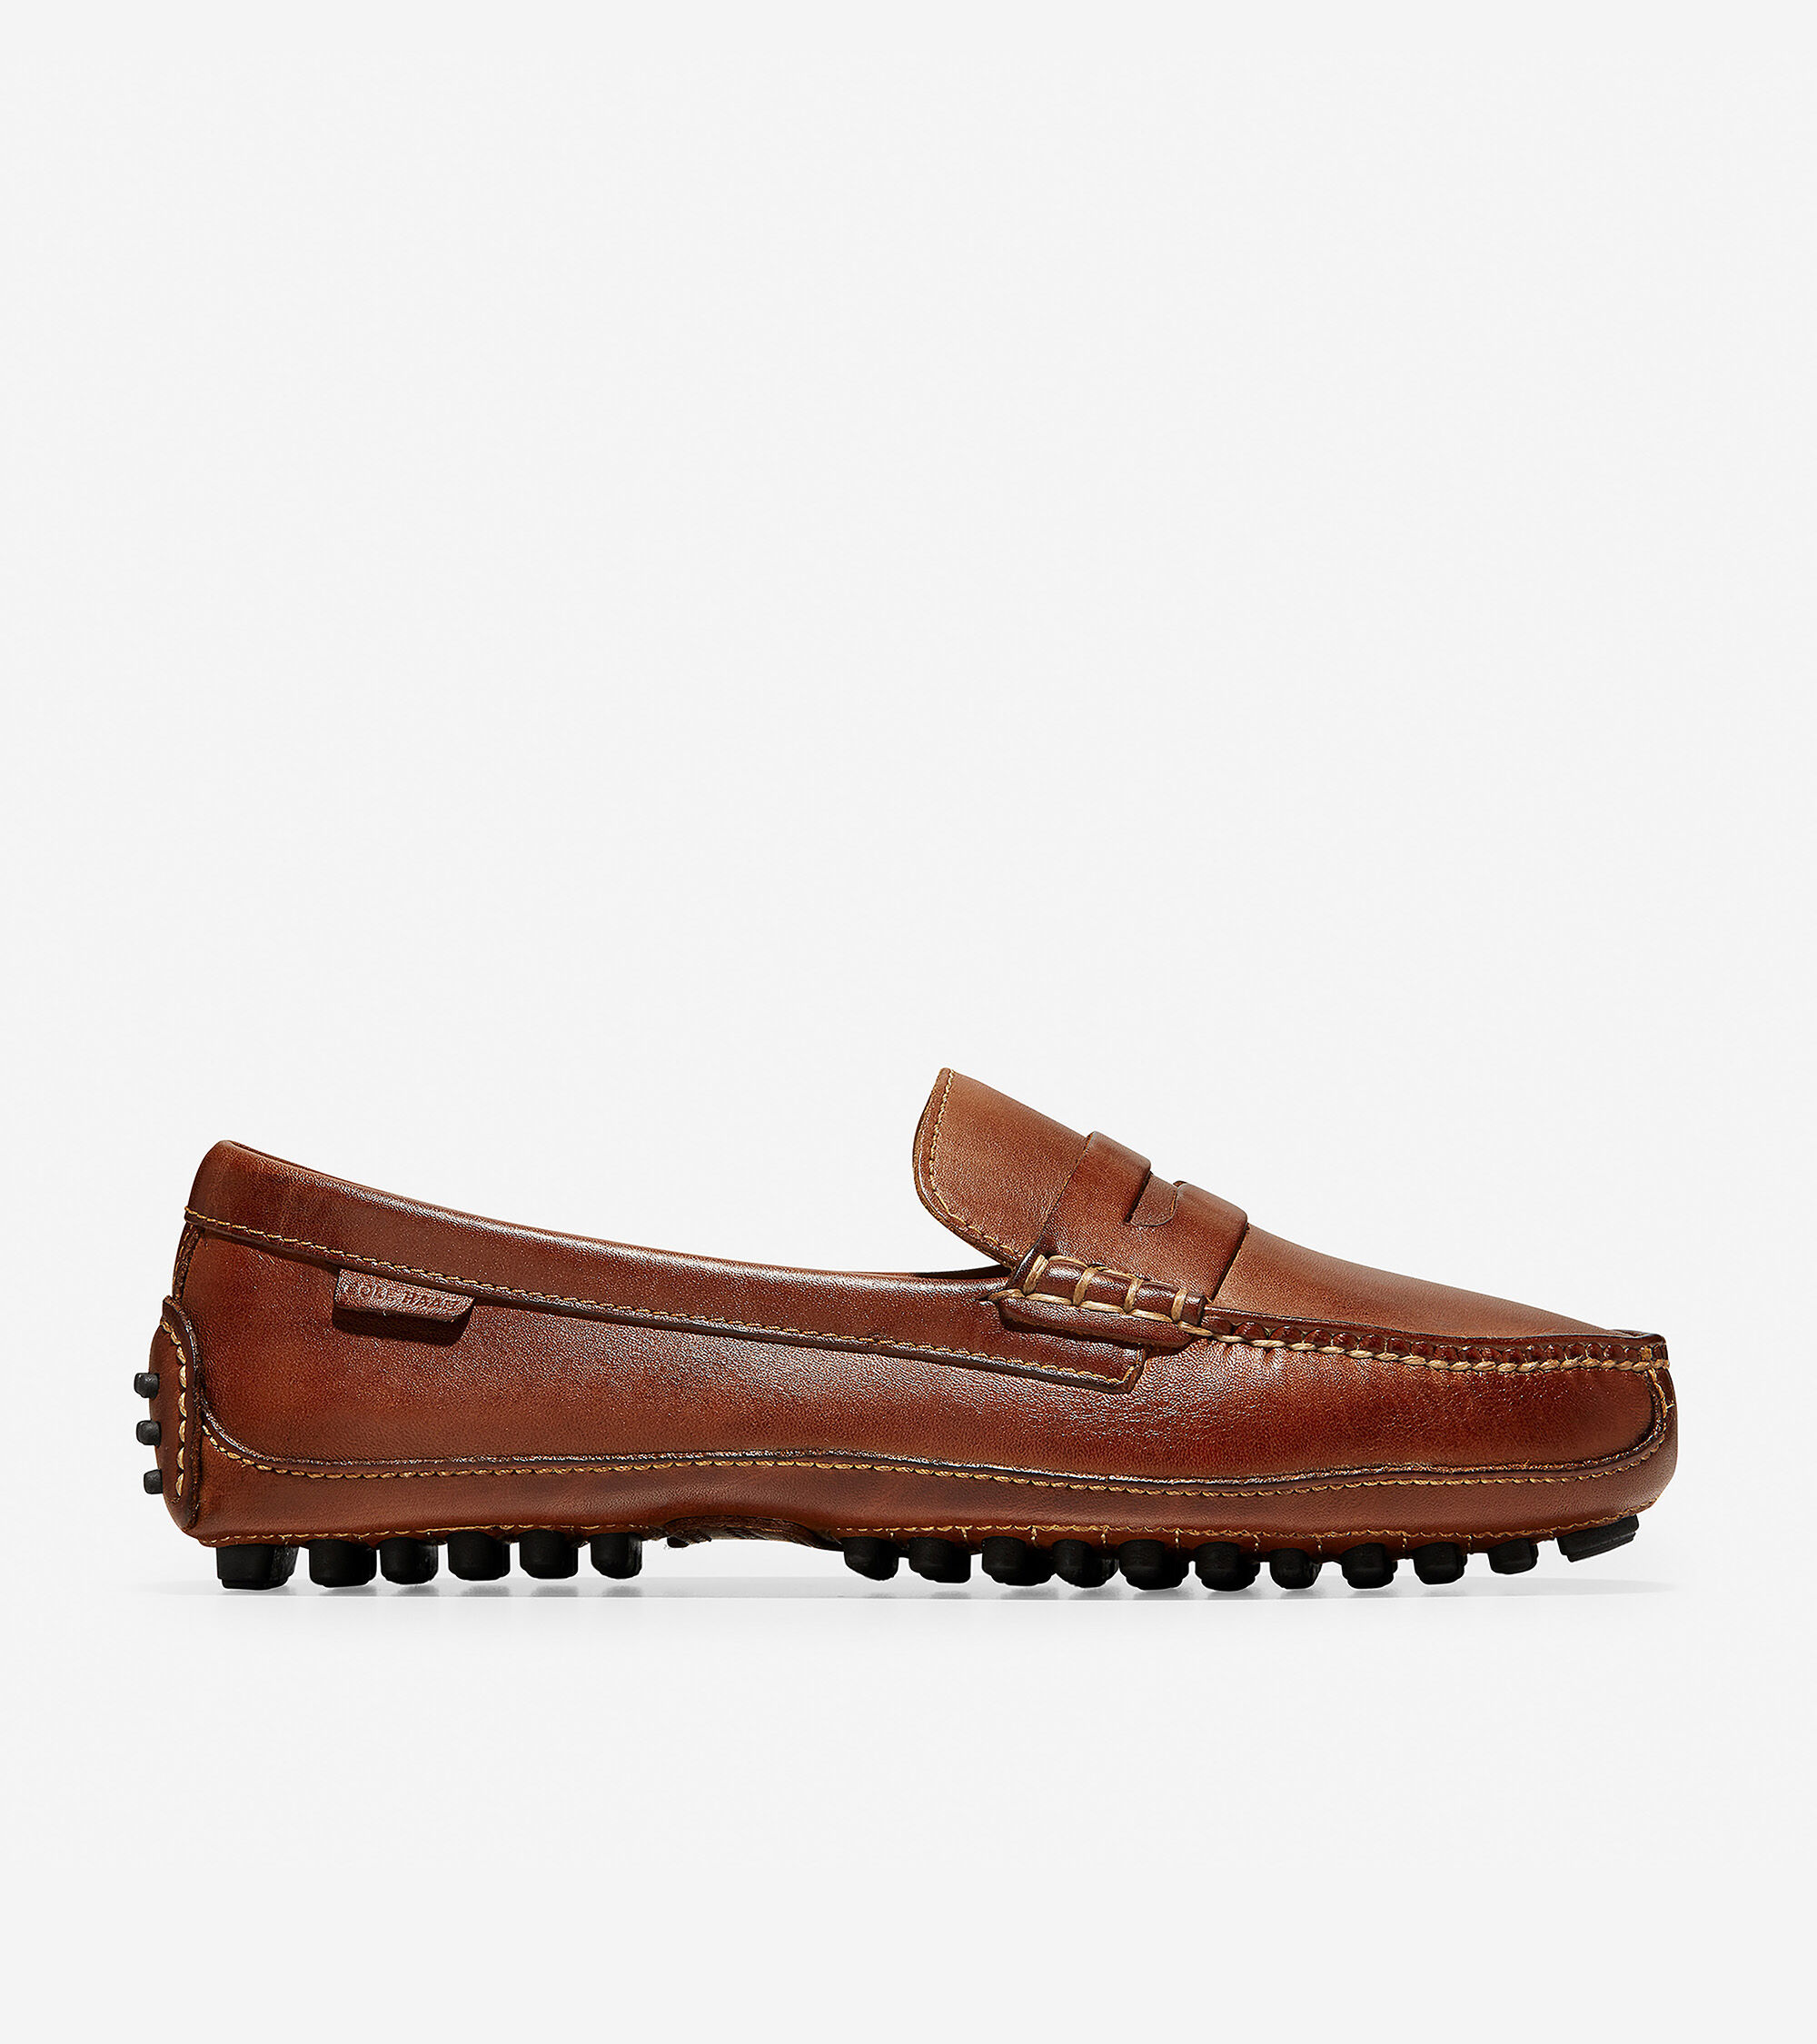 cole haan slip on loafers